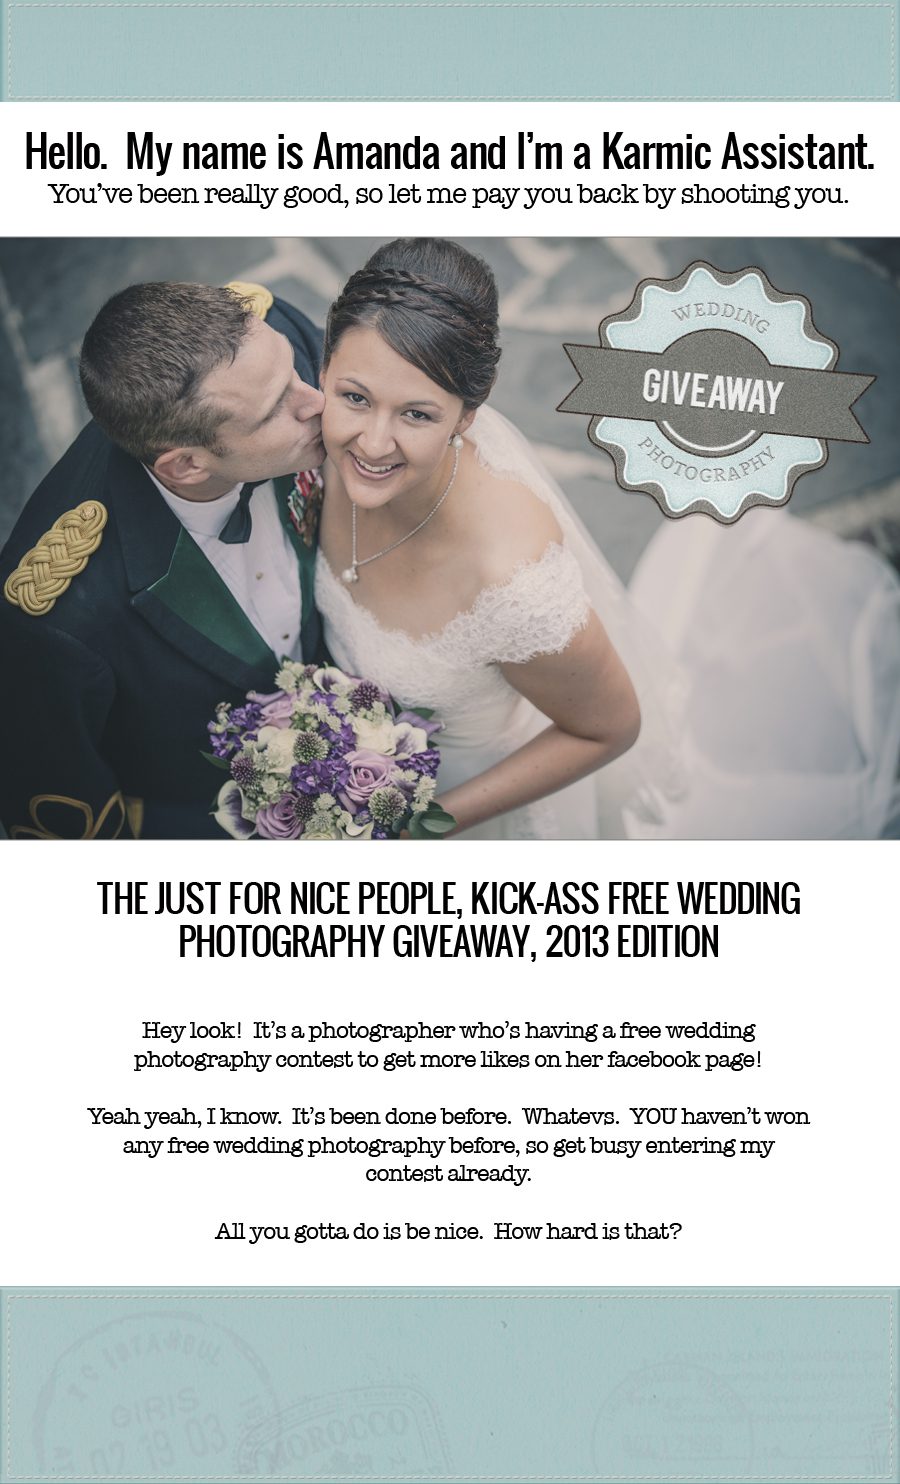 Win free wedding photography in the 2013 Nice People Free Wedding Photography Giveaway